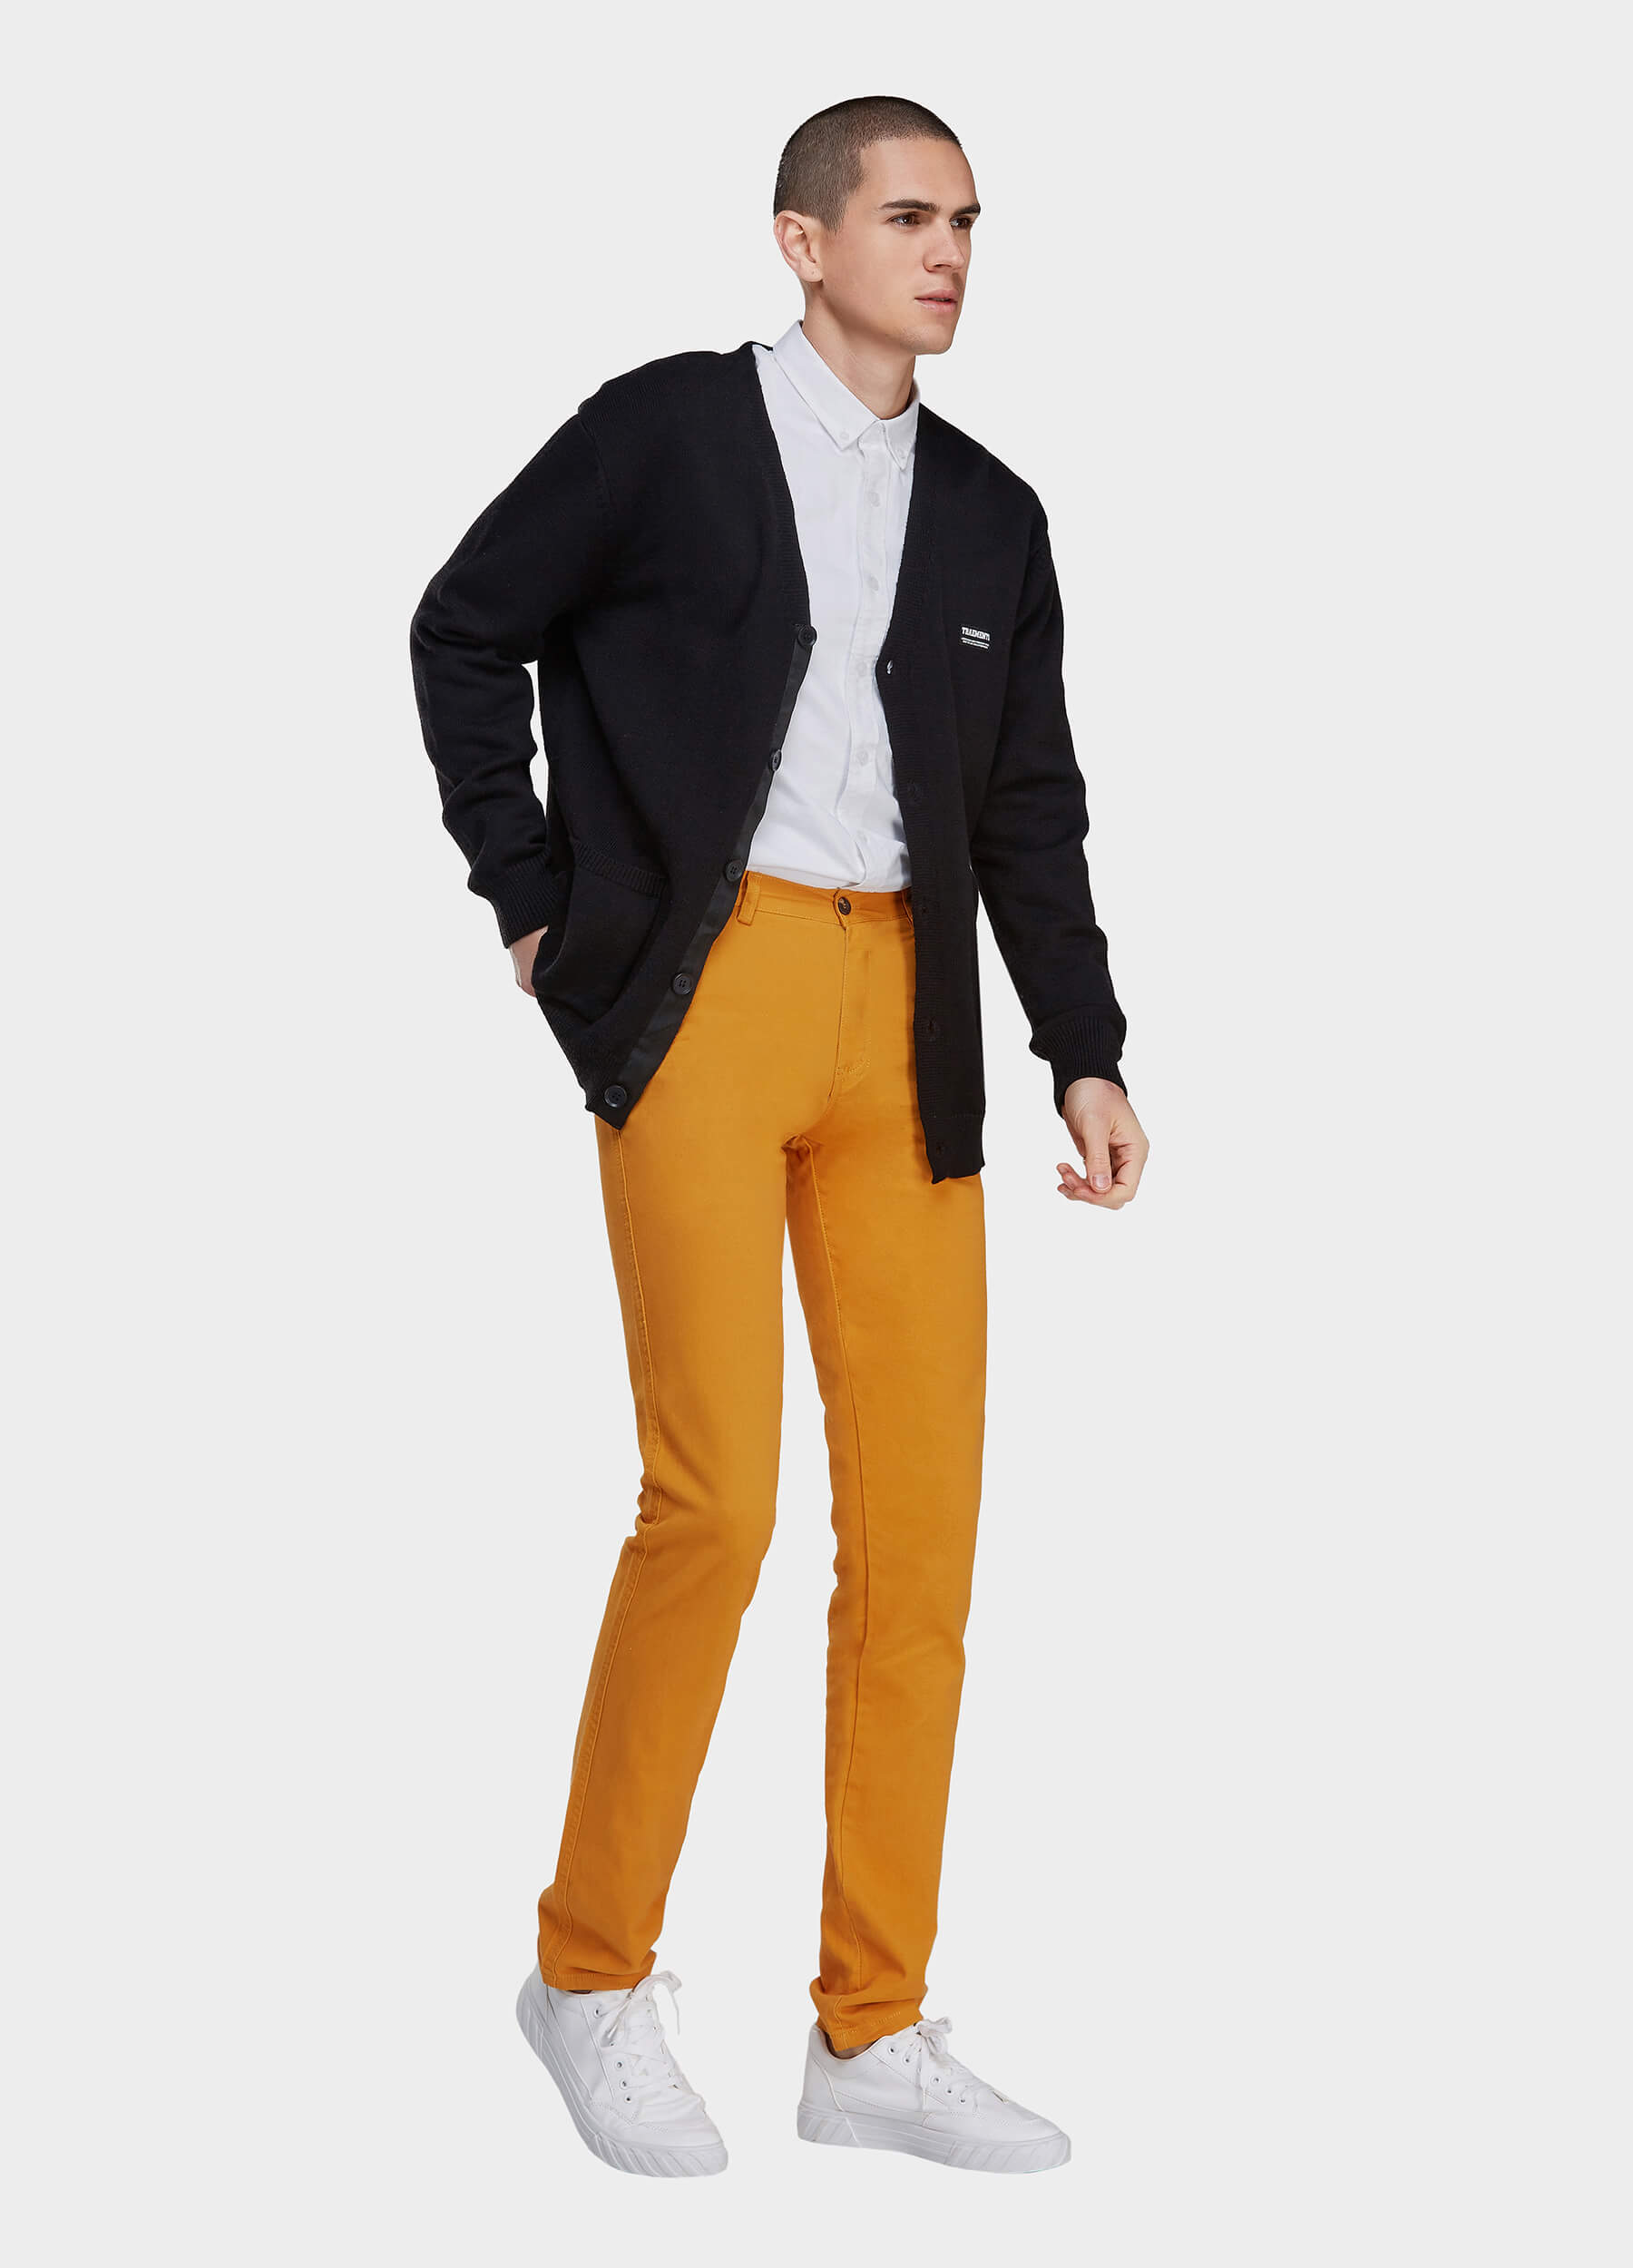 Men's Fall Straight Leg Zip Fly Button Closure Slant Pocket Casual Trousers-Yellow side view